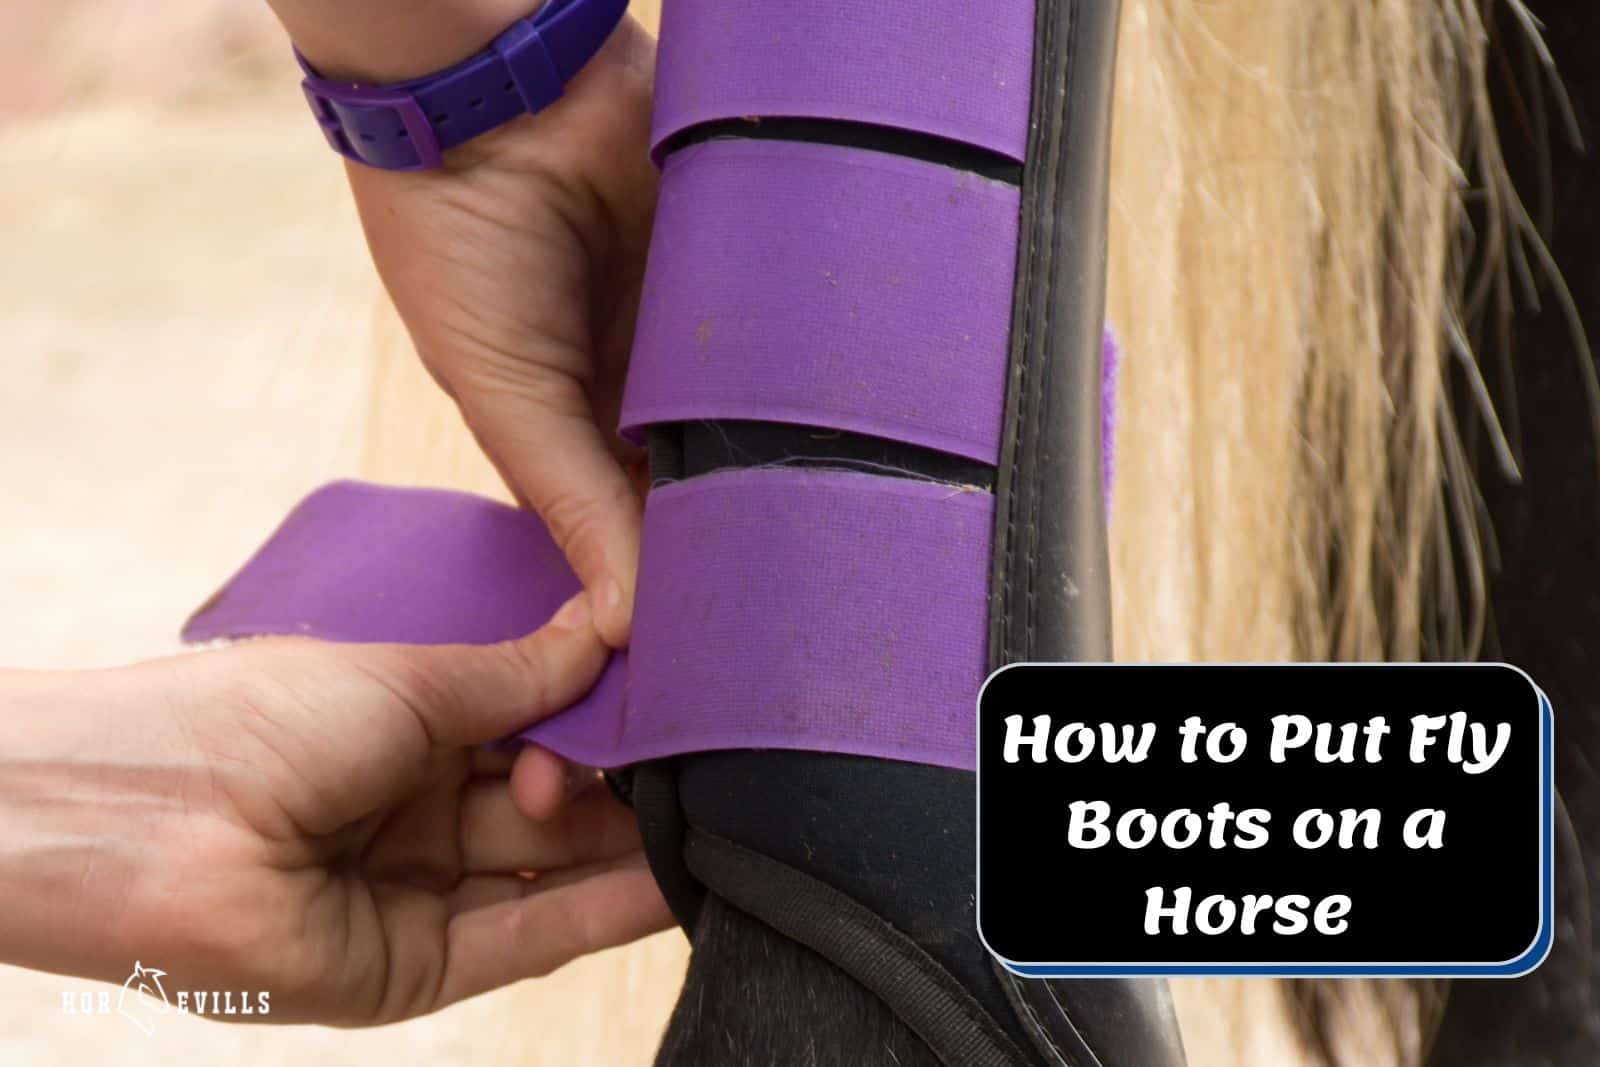 lady showing how to put fly boots on a horse